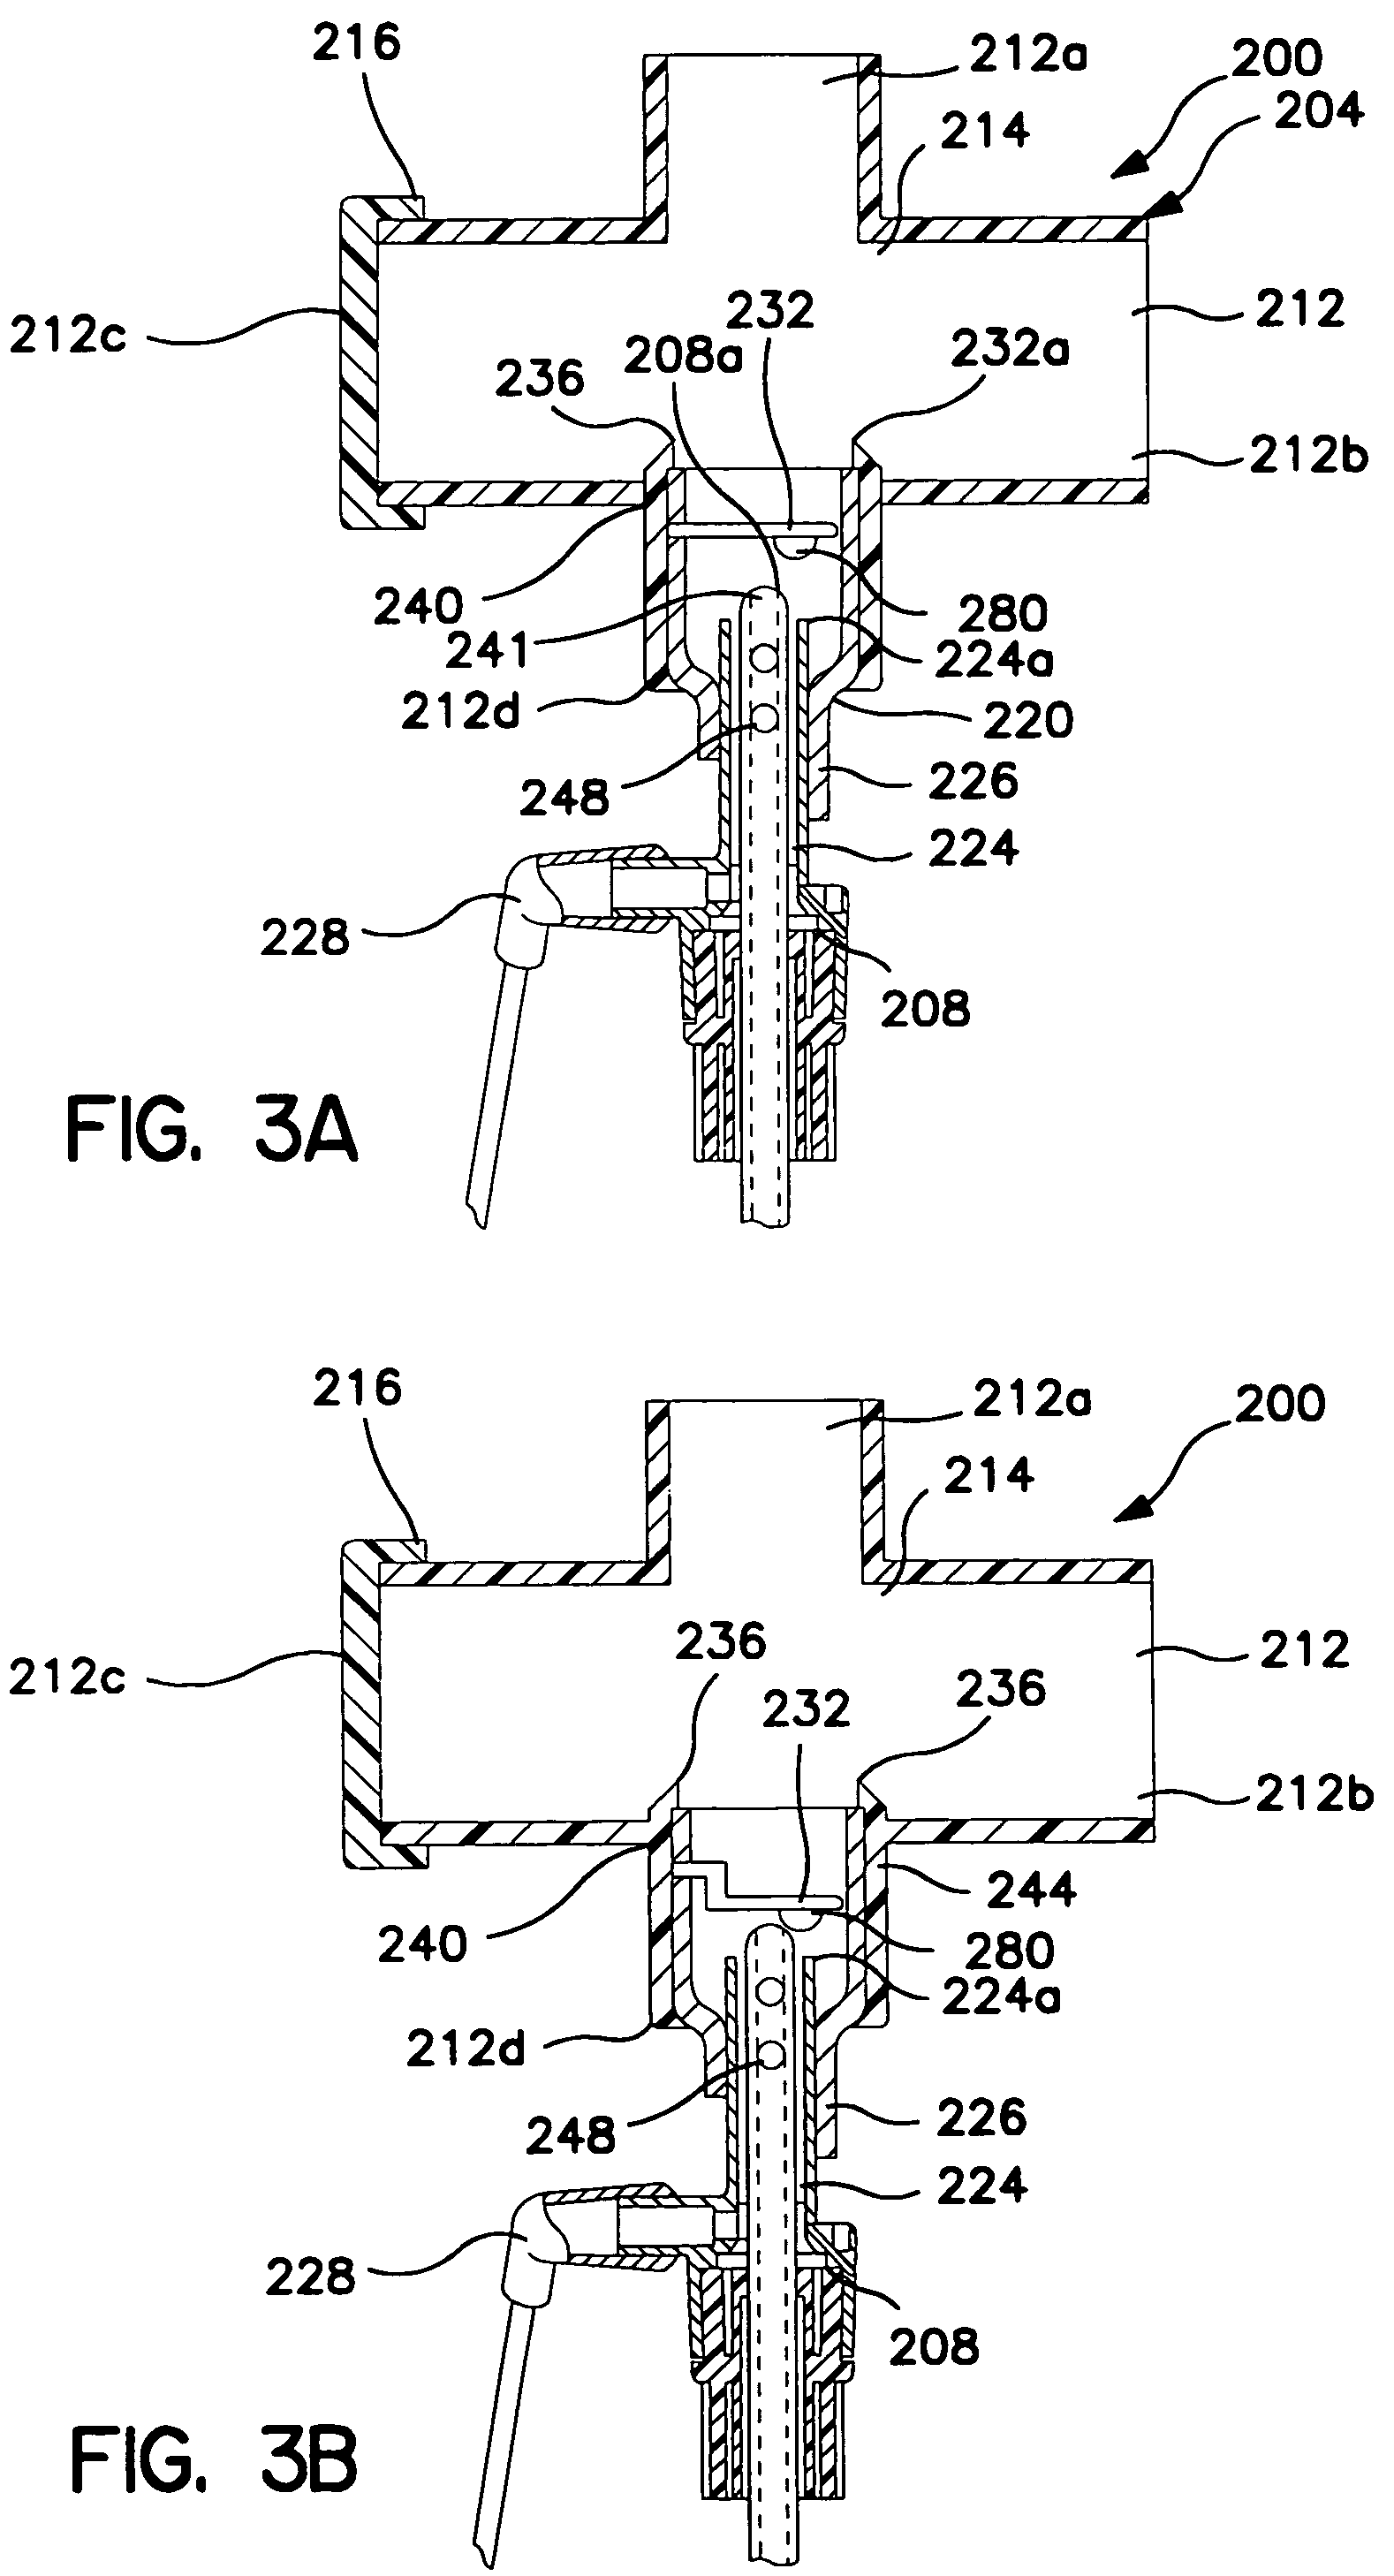 Endotracheal catheter and manifold assembly with improved valve